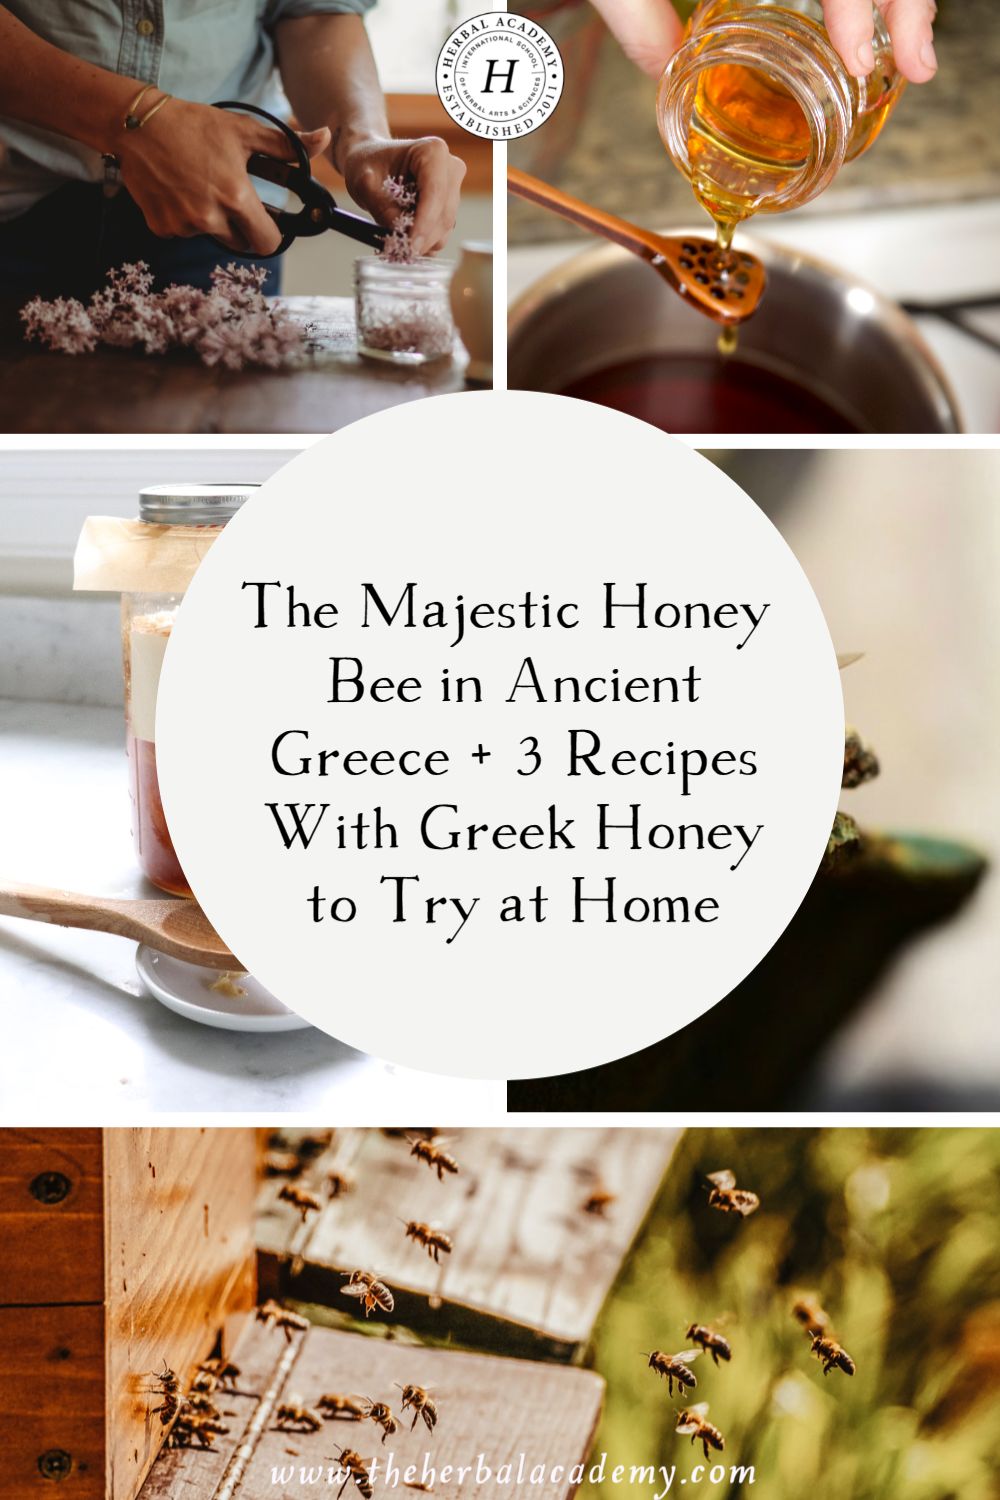 The Majestic Honey Bee in Ancient Greece + 3 Recipes with Greek Honey to Try at Home | Herbal Academy | We will explore the remarkable history of the honey bee in ancient Greece and learn about delicious honey recipes to try at home.